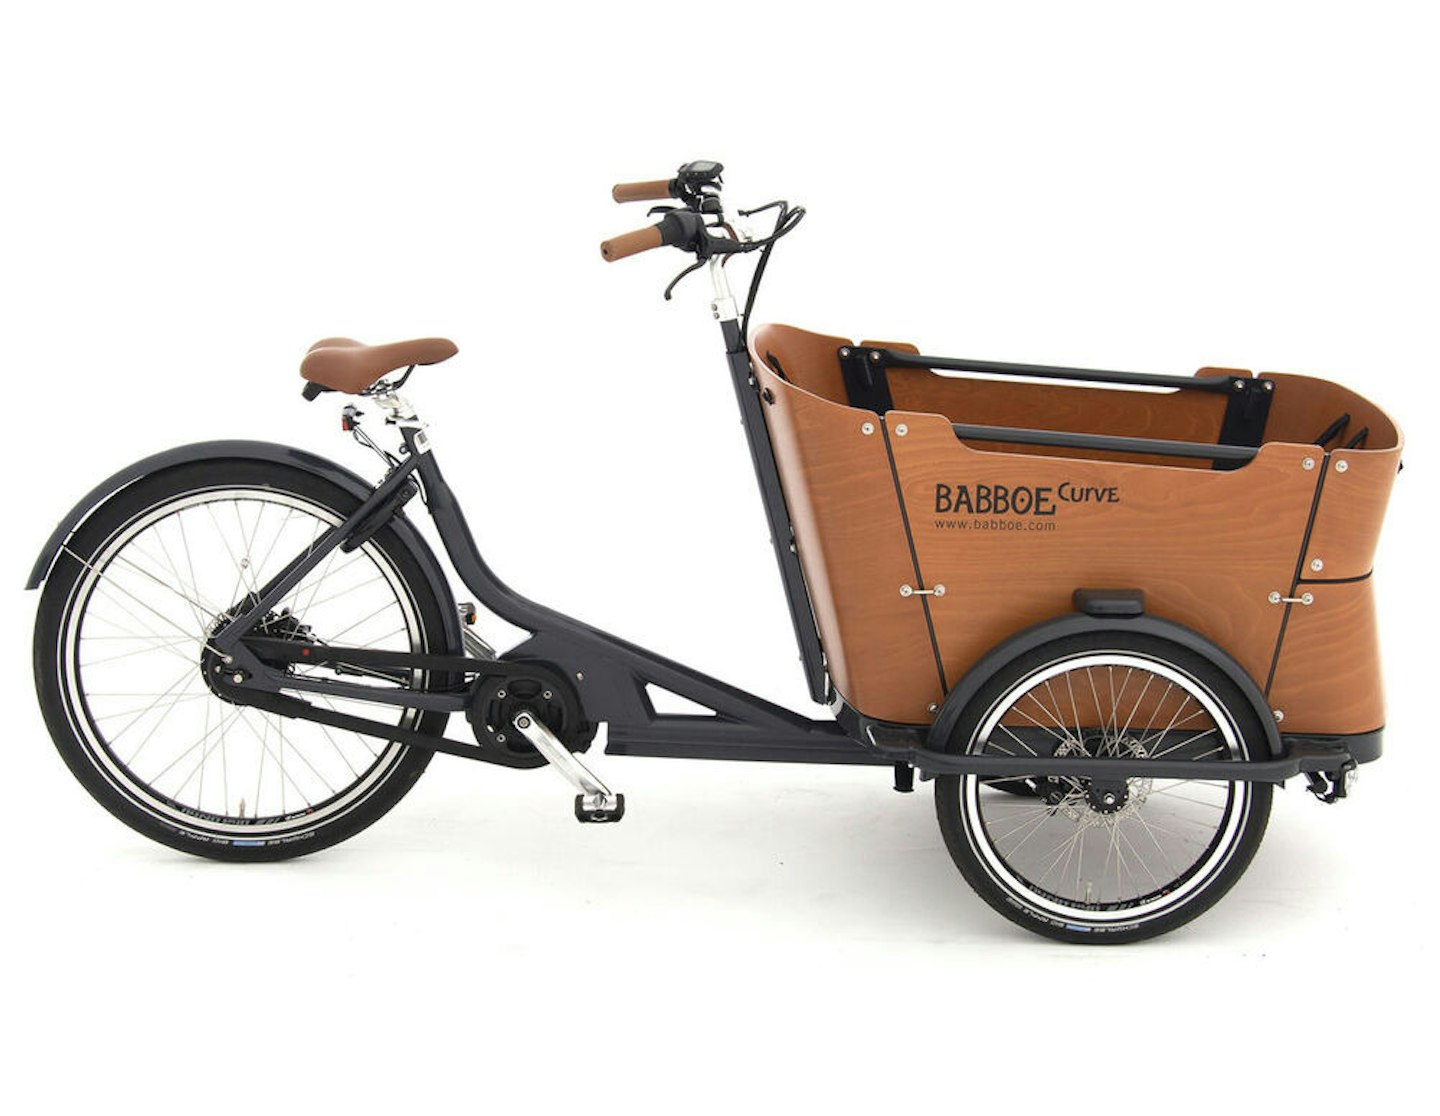 Babboe Curve Mountain 500WH